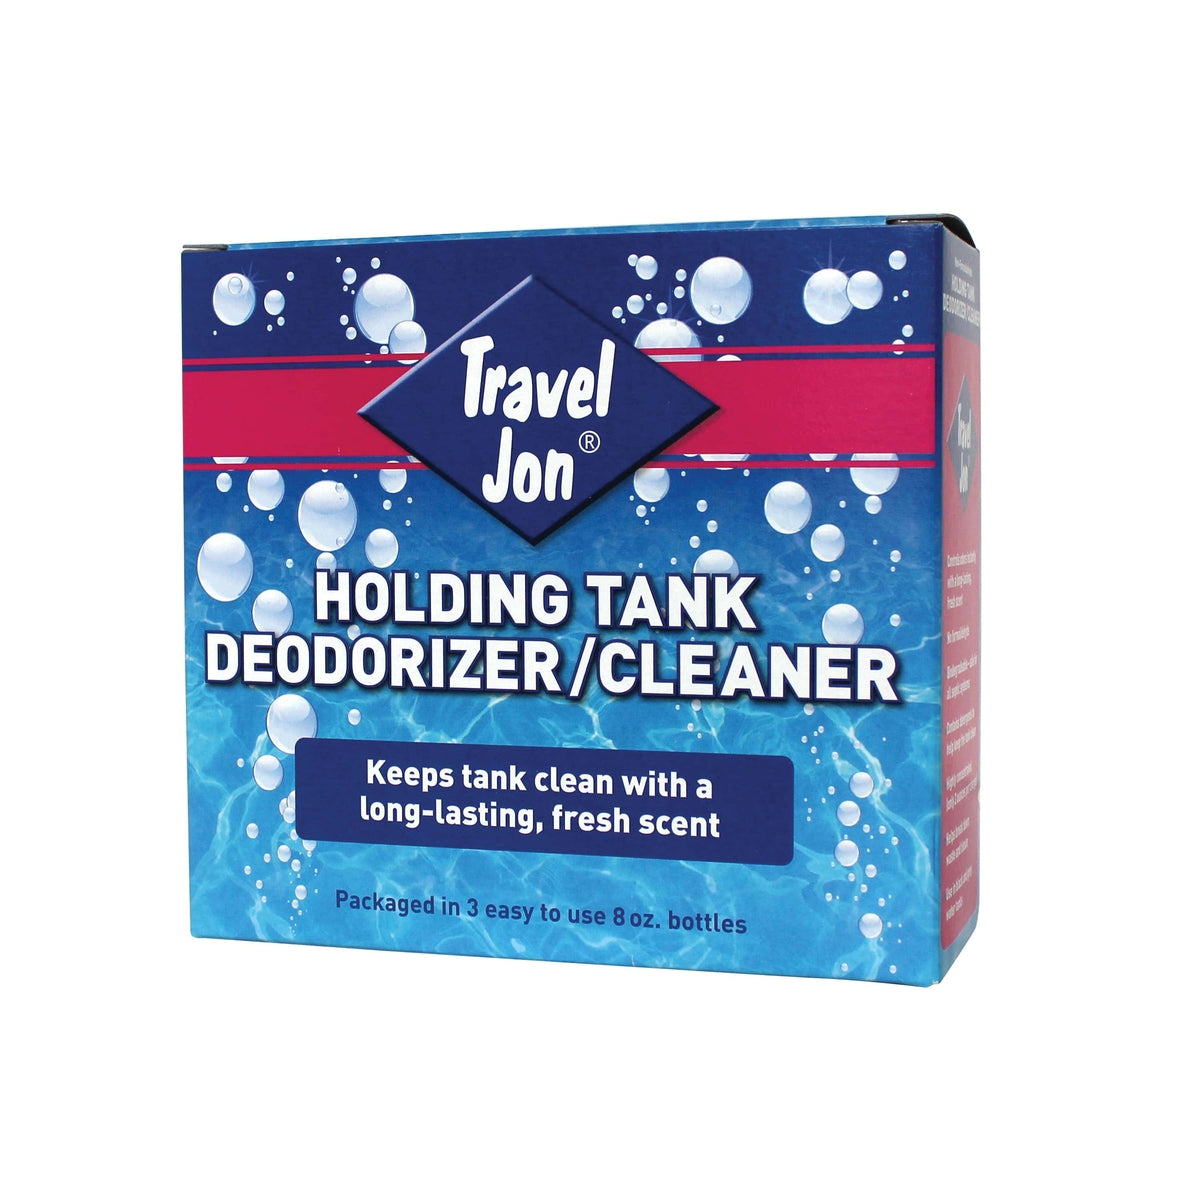 Century Chemical Qualifies for Free Shipping Century Chemical Travel Jon Holding Tank Deodorizer/Cleaner 8 oz 3-pk #20051-8Z